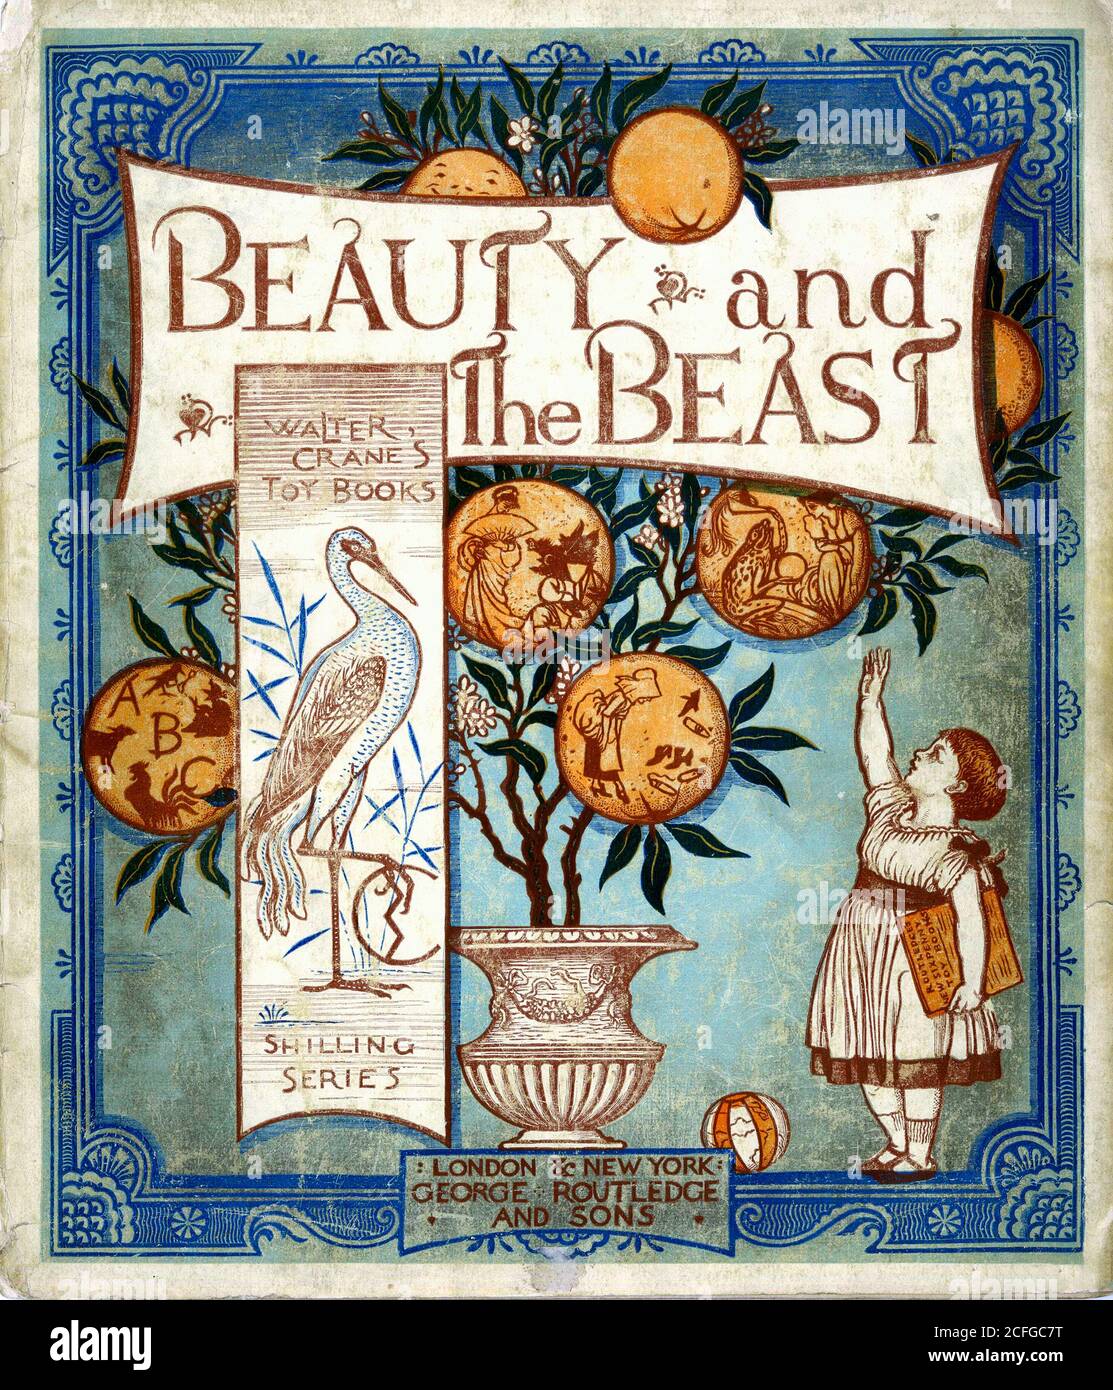 Beauty and the Beast. Front cover of a children's book by Jeanne-Marie Leprince de Beaumont, published in 1875/6 Stock Photo